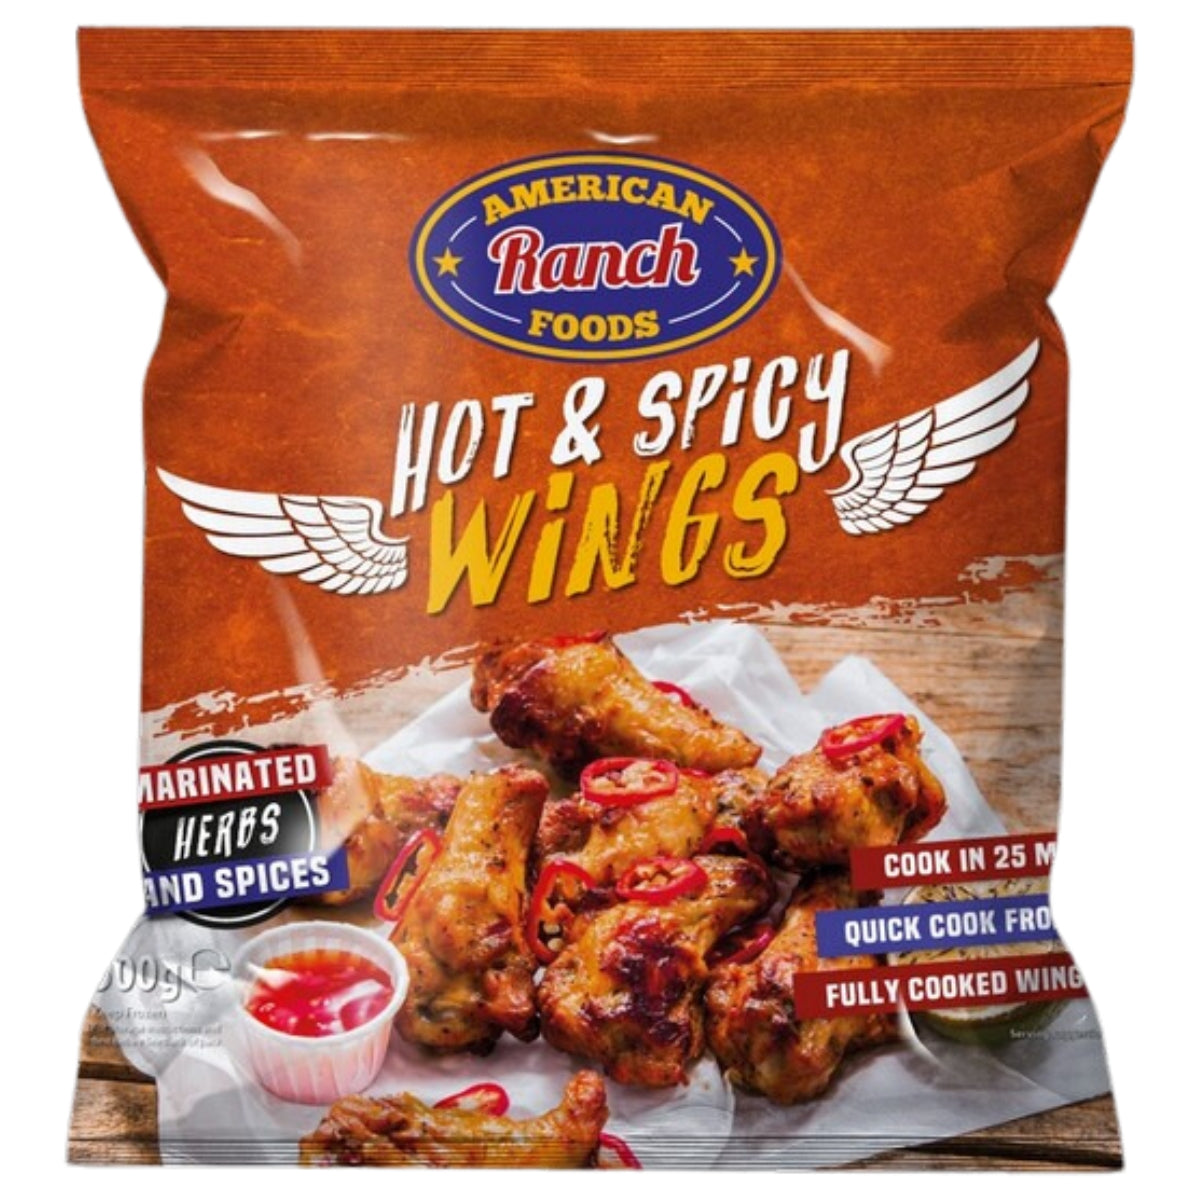 American Ranch Foods - Hot & Spicy Wings - 500g hot & spicy wings.